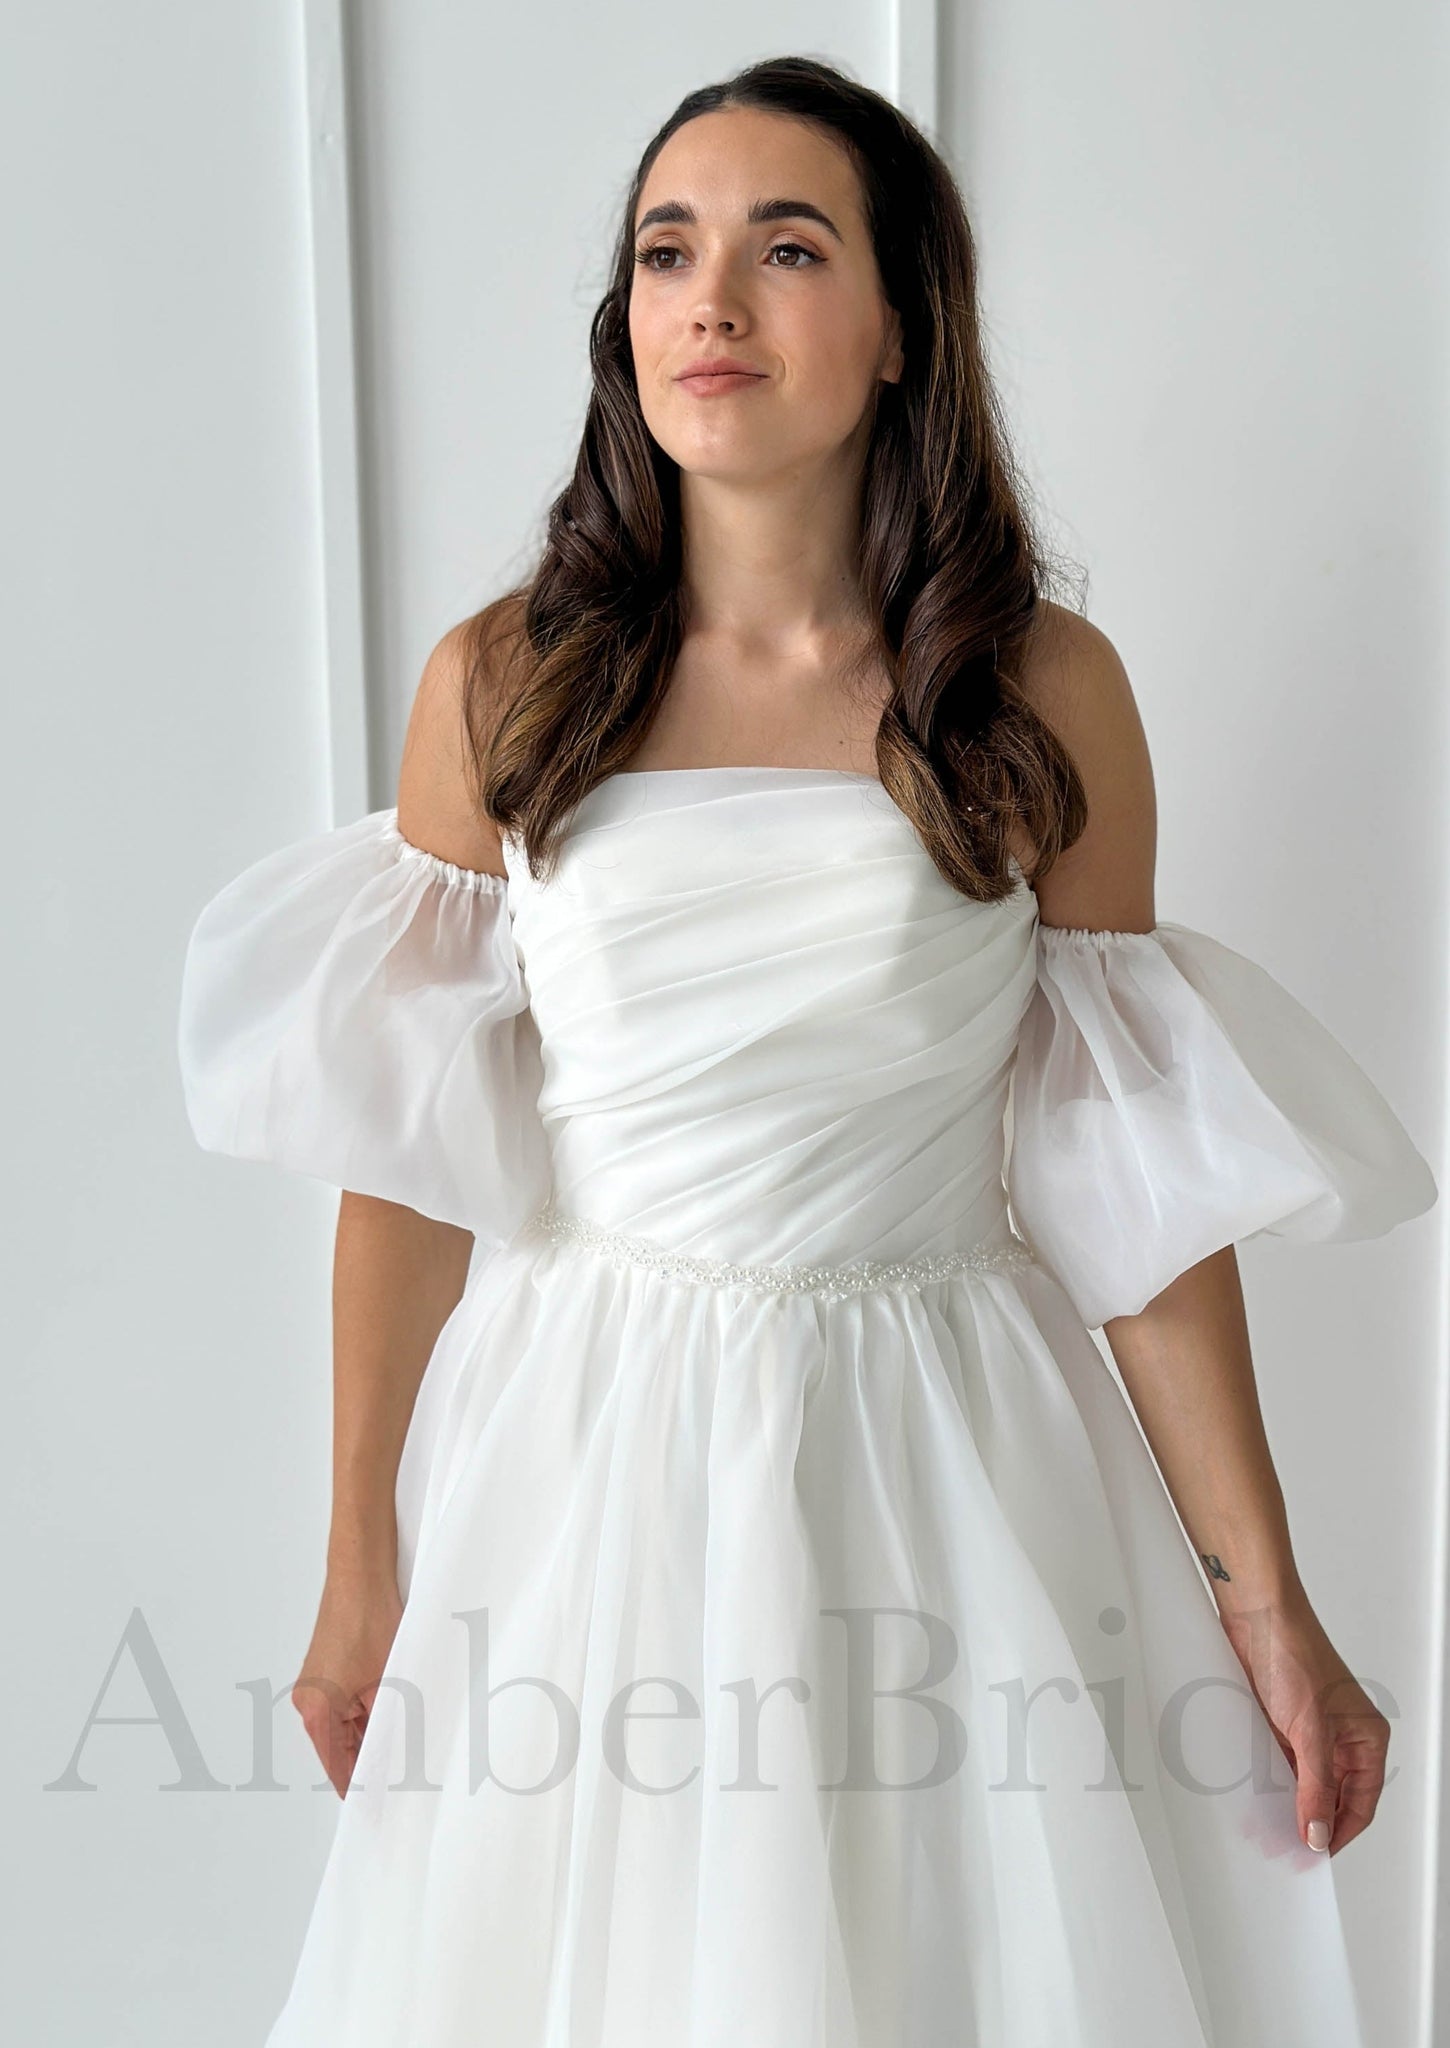 Elegant A-Line Pleated Organza Wedding Dress with Straight Neckline and Puffed Sleeves